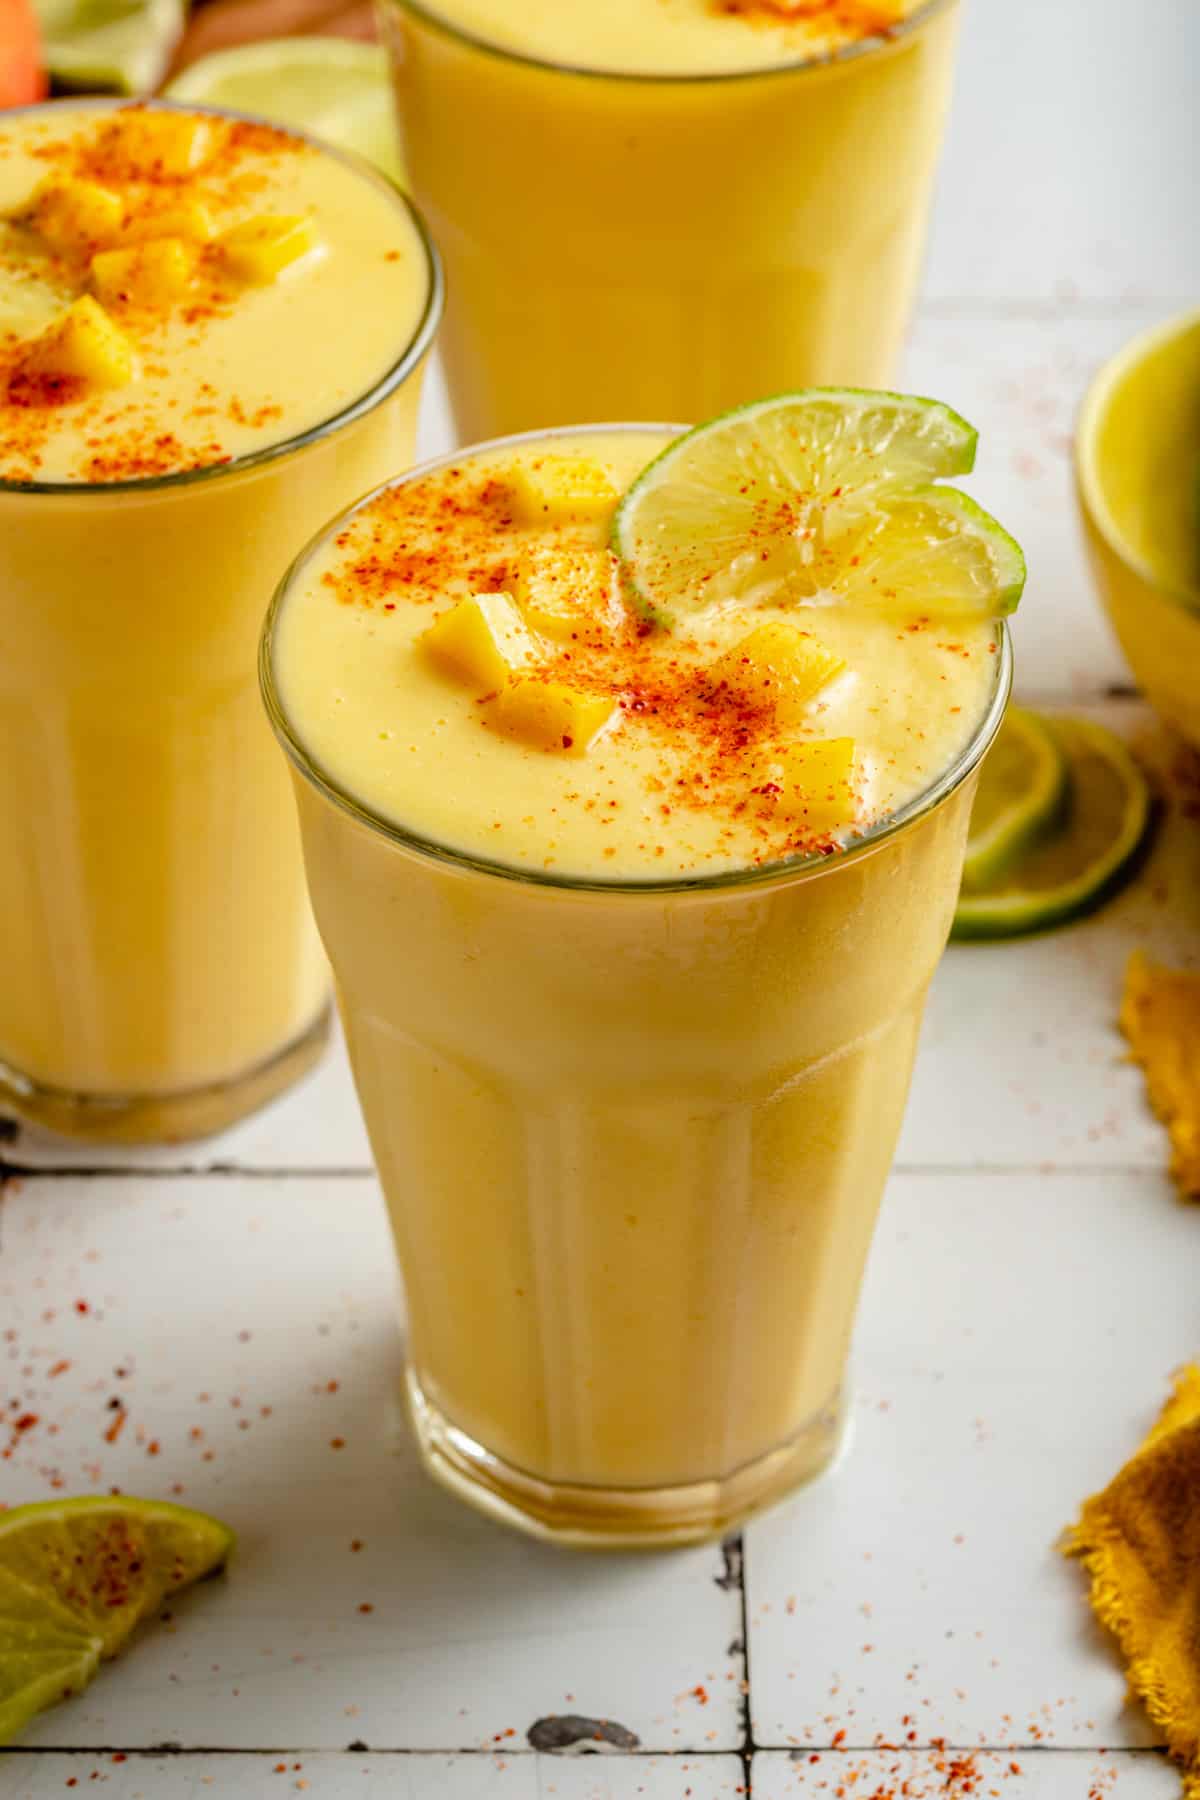 Glasses of mango pineapple smoothie on a tiled surface with lime and mango around.